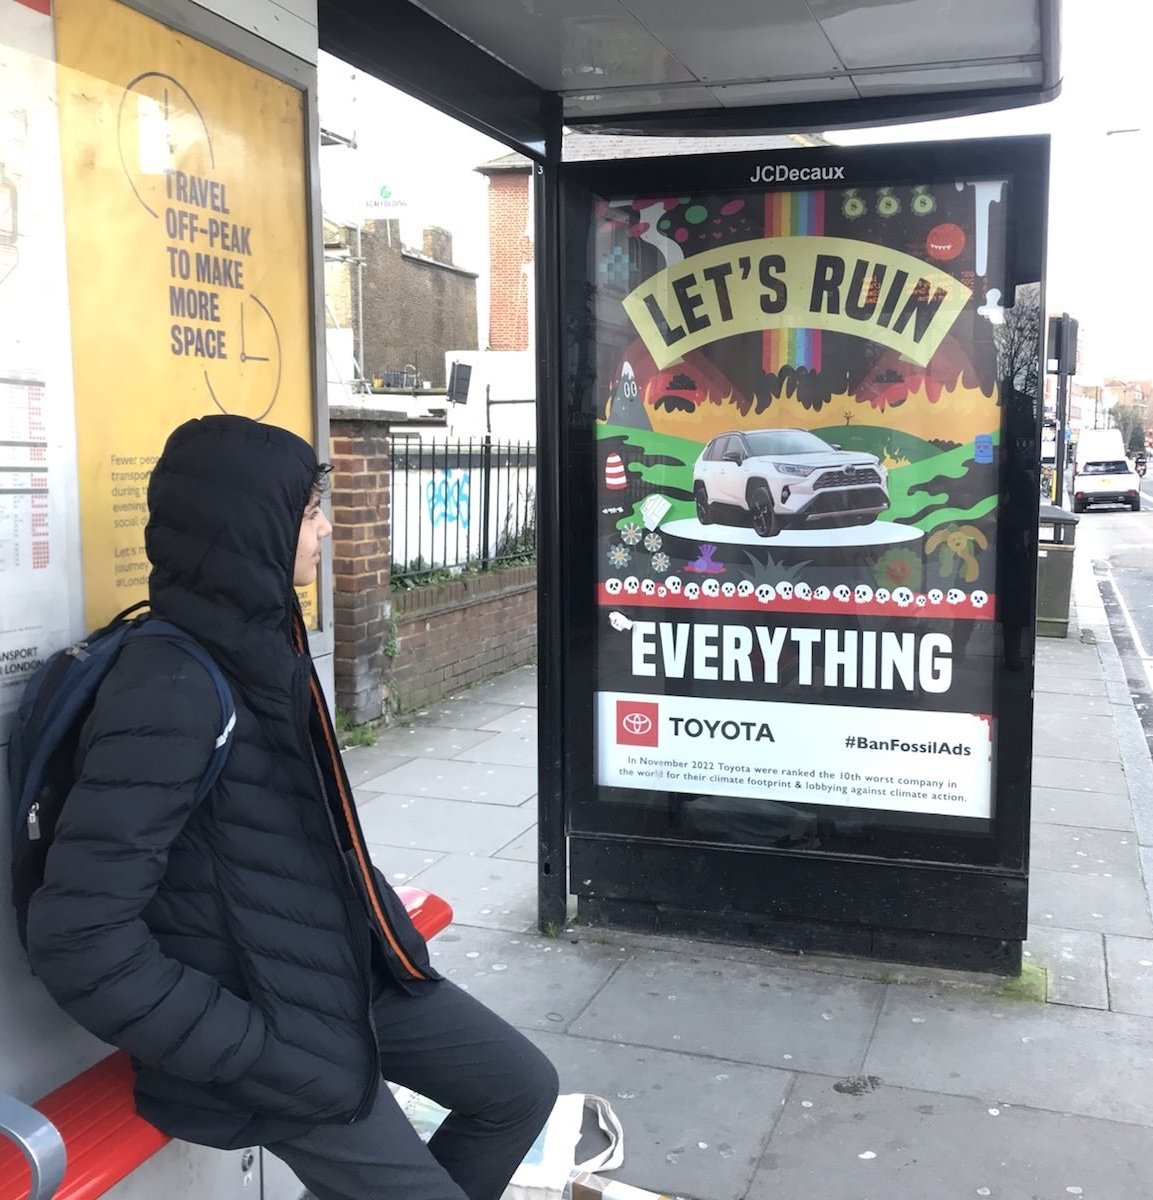 😍 Honest advertising appearing in West London! 🤩
#BeyondZero #BanFossilAds  #mondaythoughts